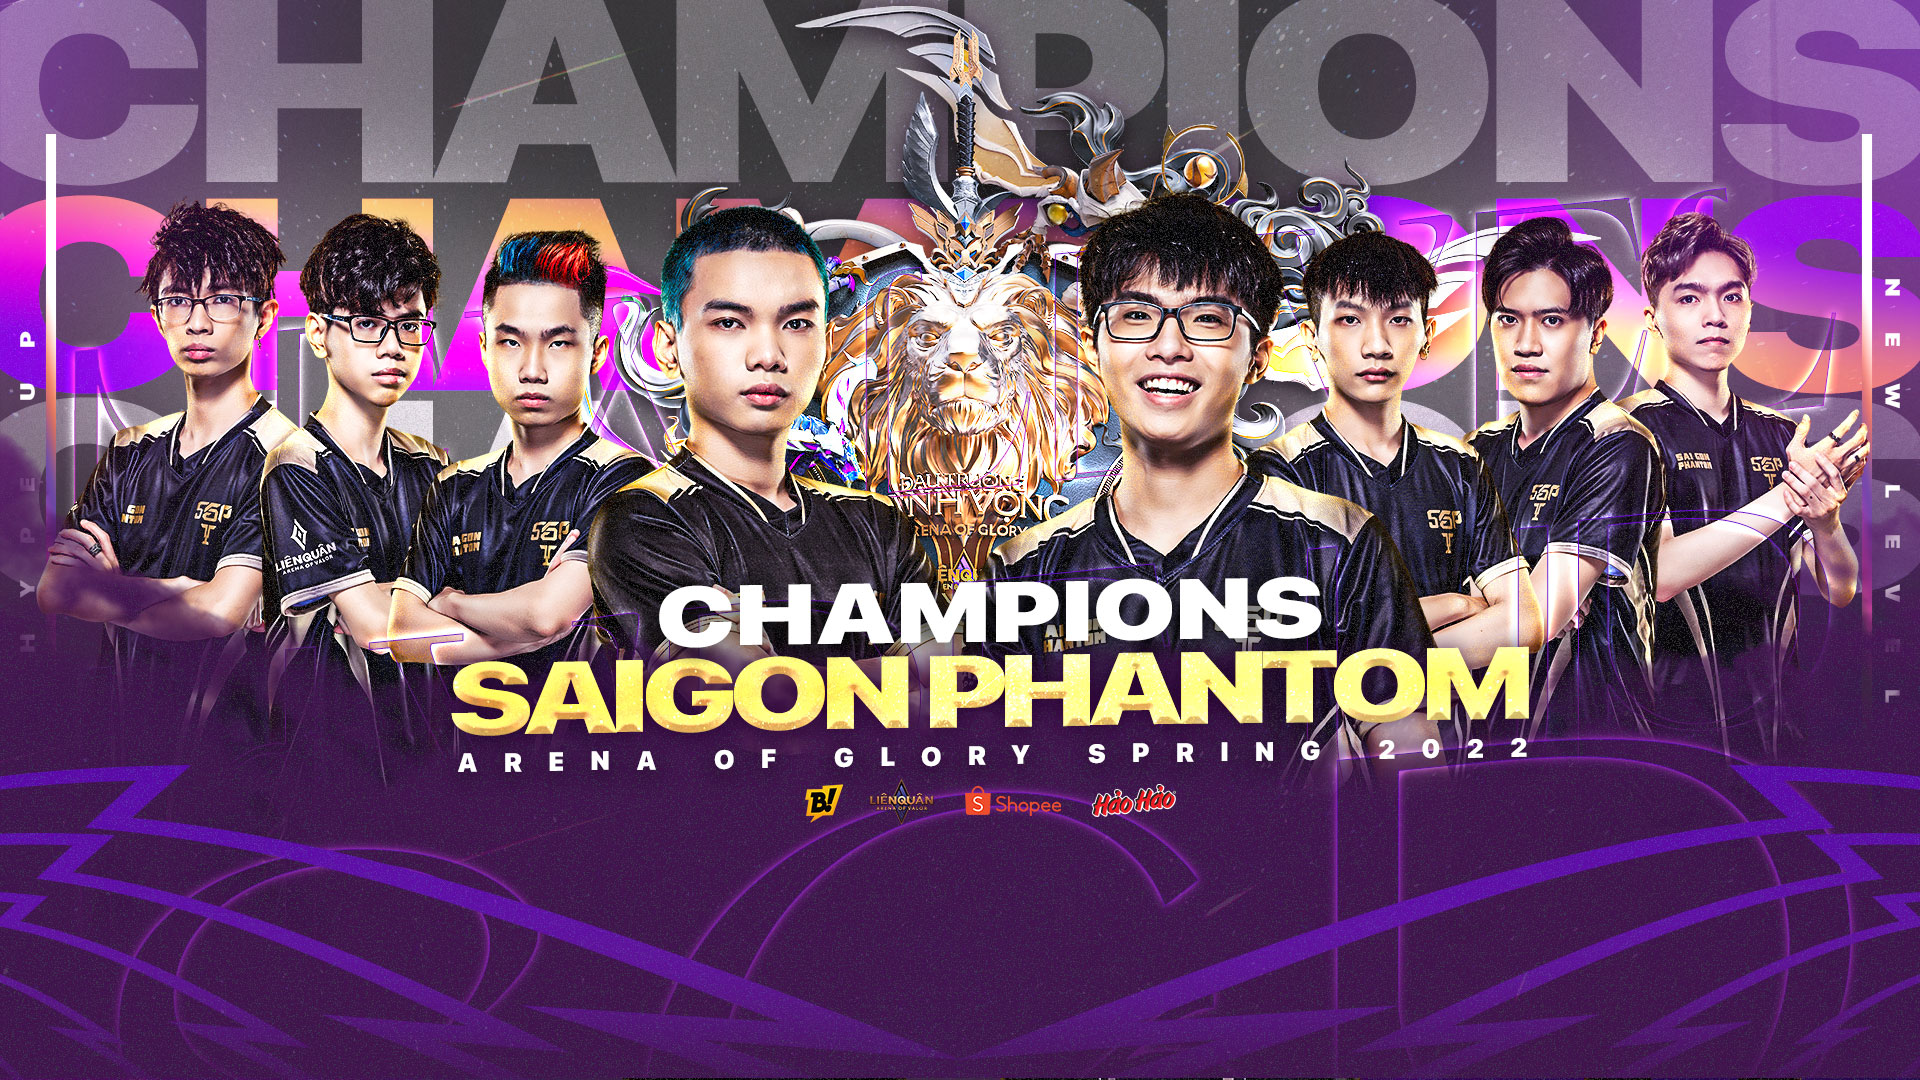 Saigon Phantom destroys V Gaming, setting up a new era with the 4th time crowned champion of the Arena of Fame - Photo 4.